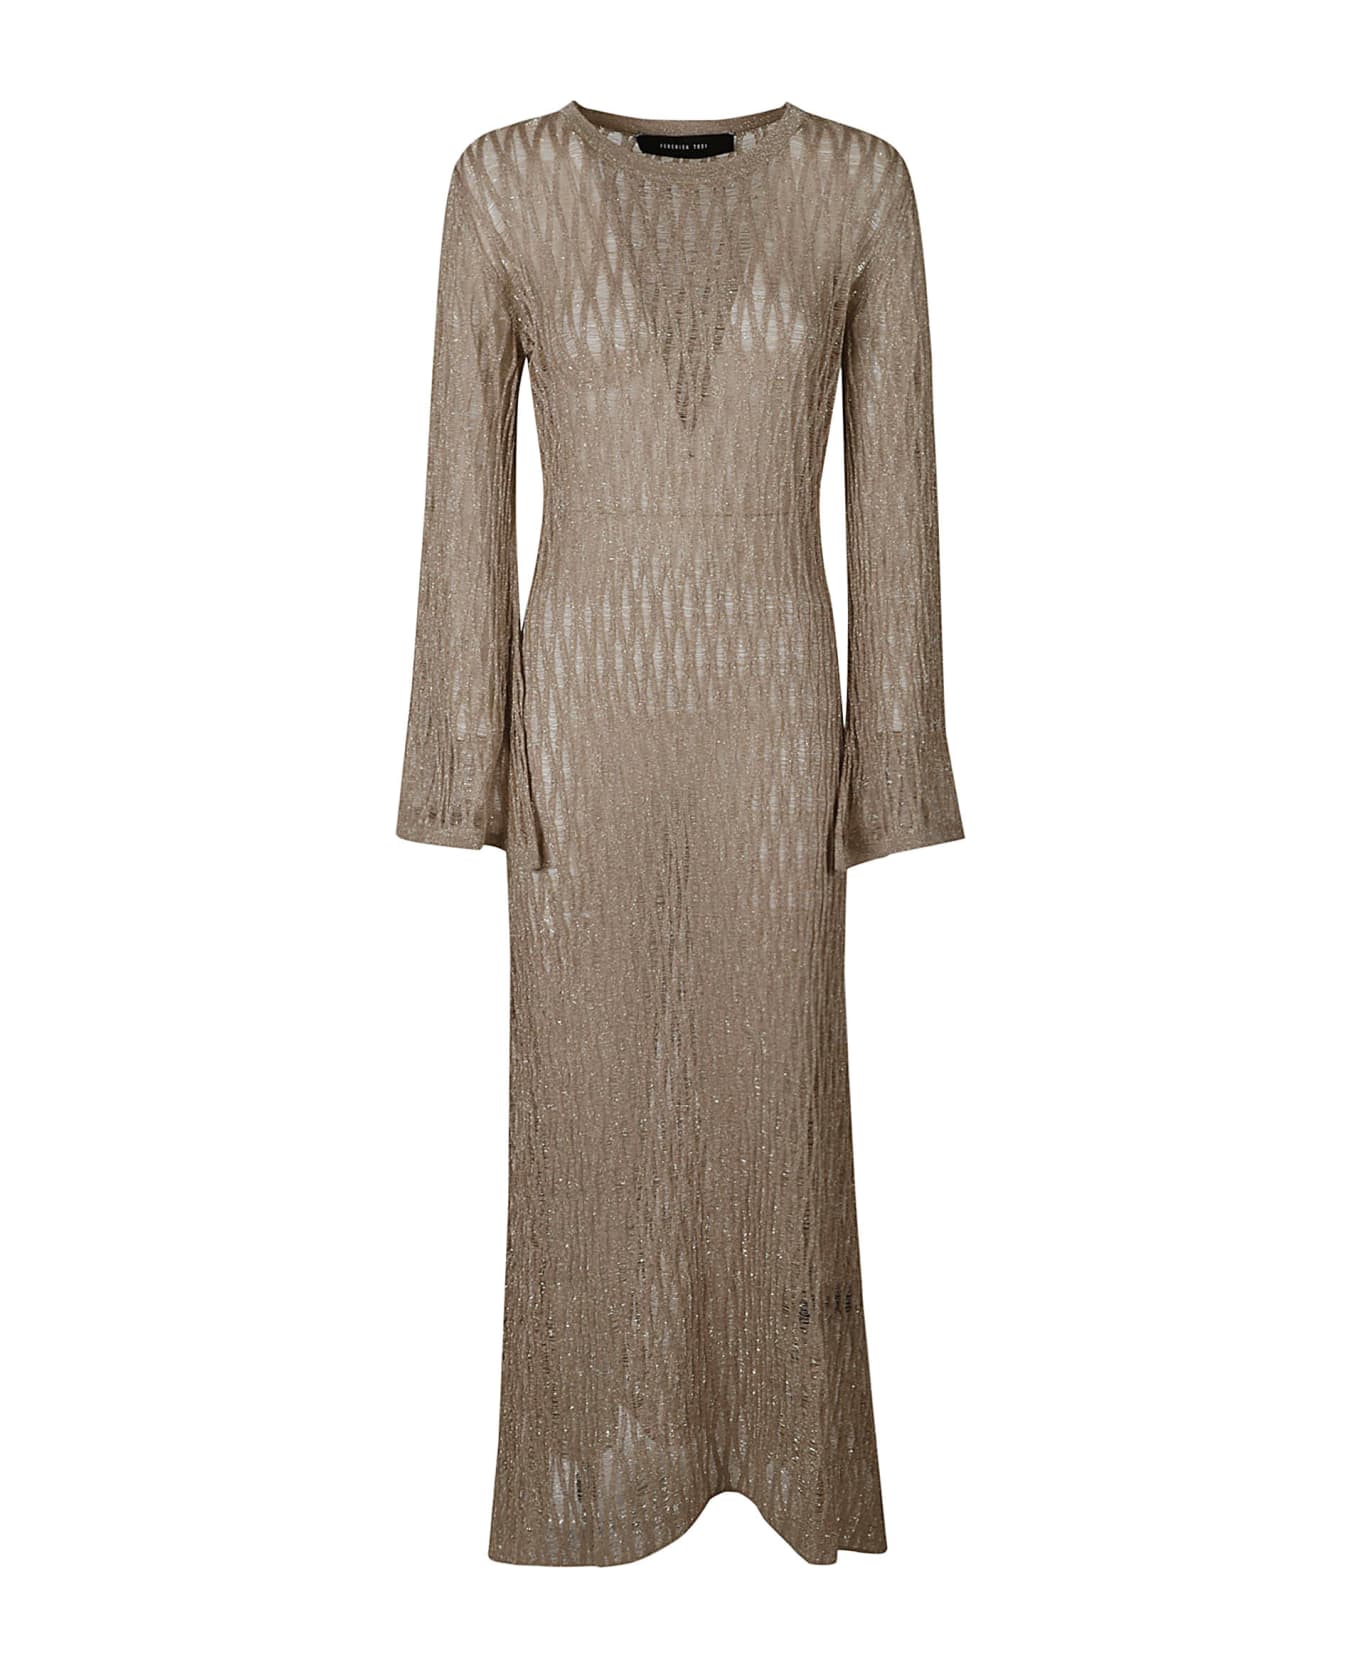 Federica Tosi See Through Long-sleeved Dress - Gold